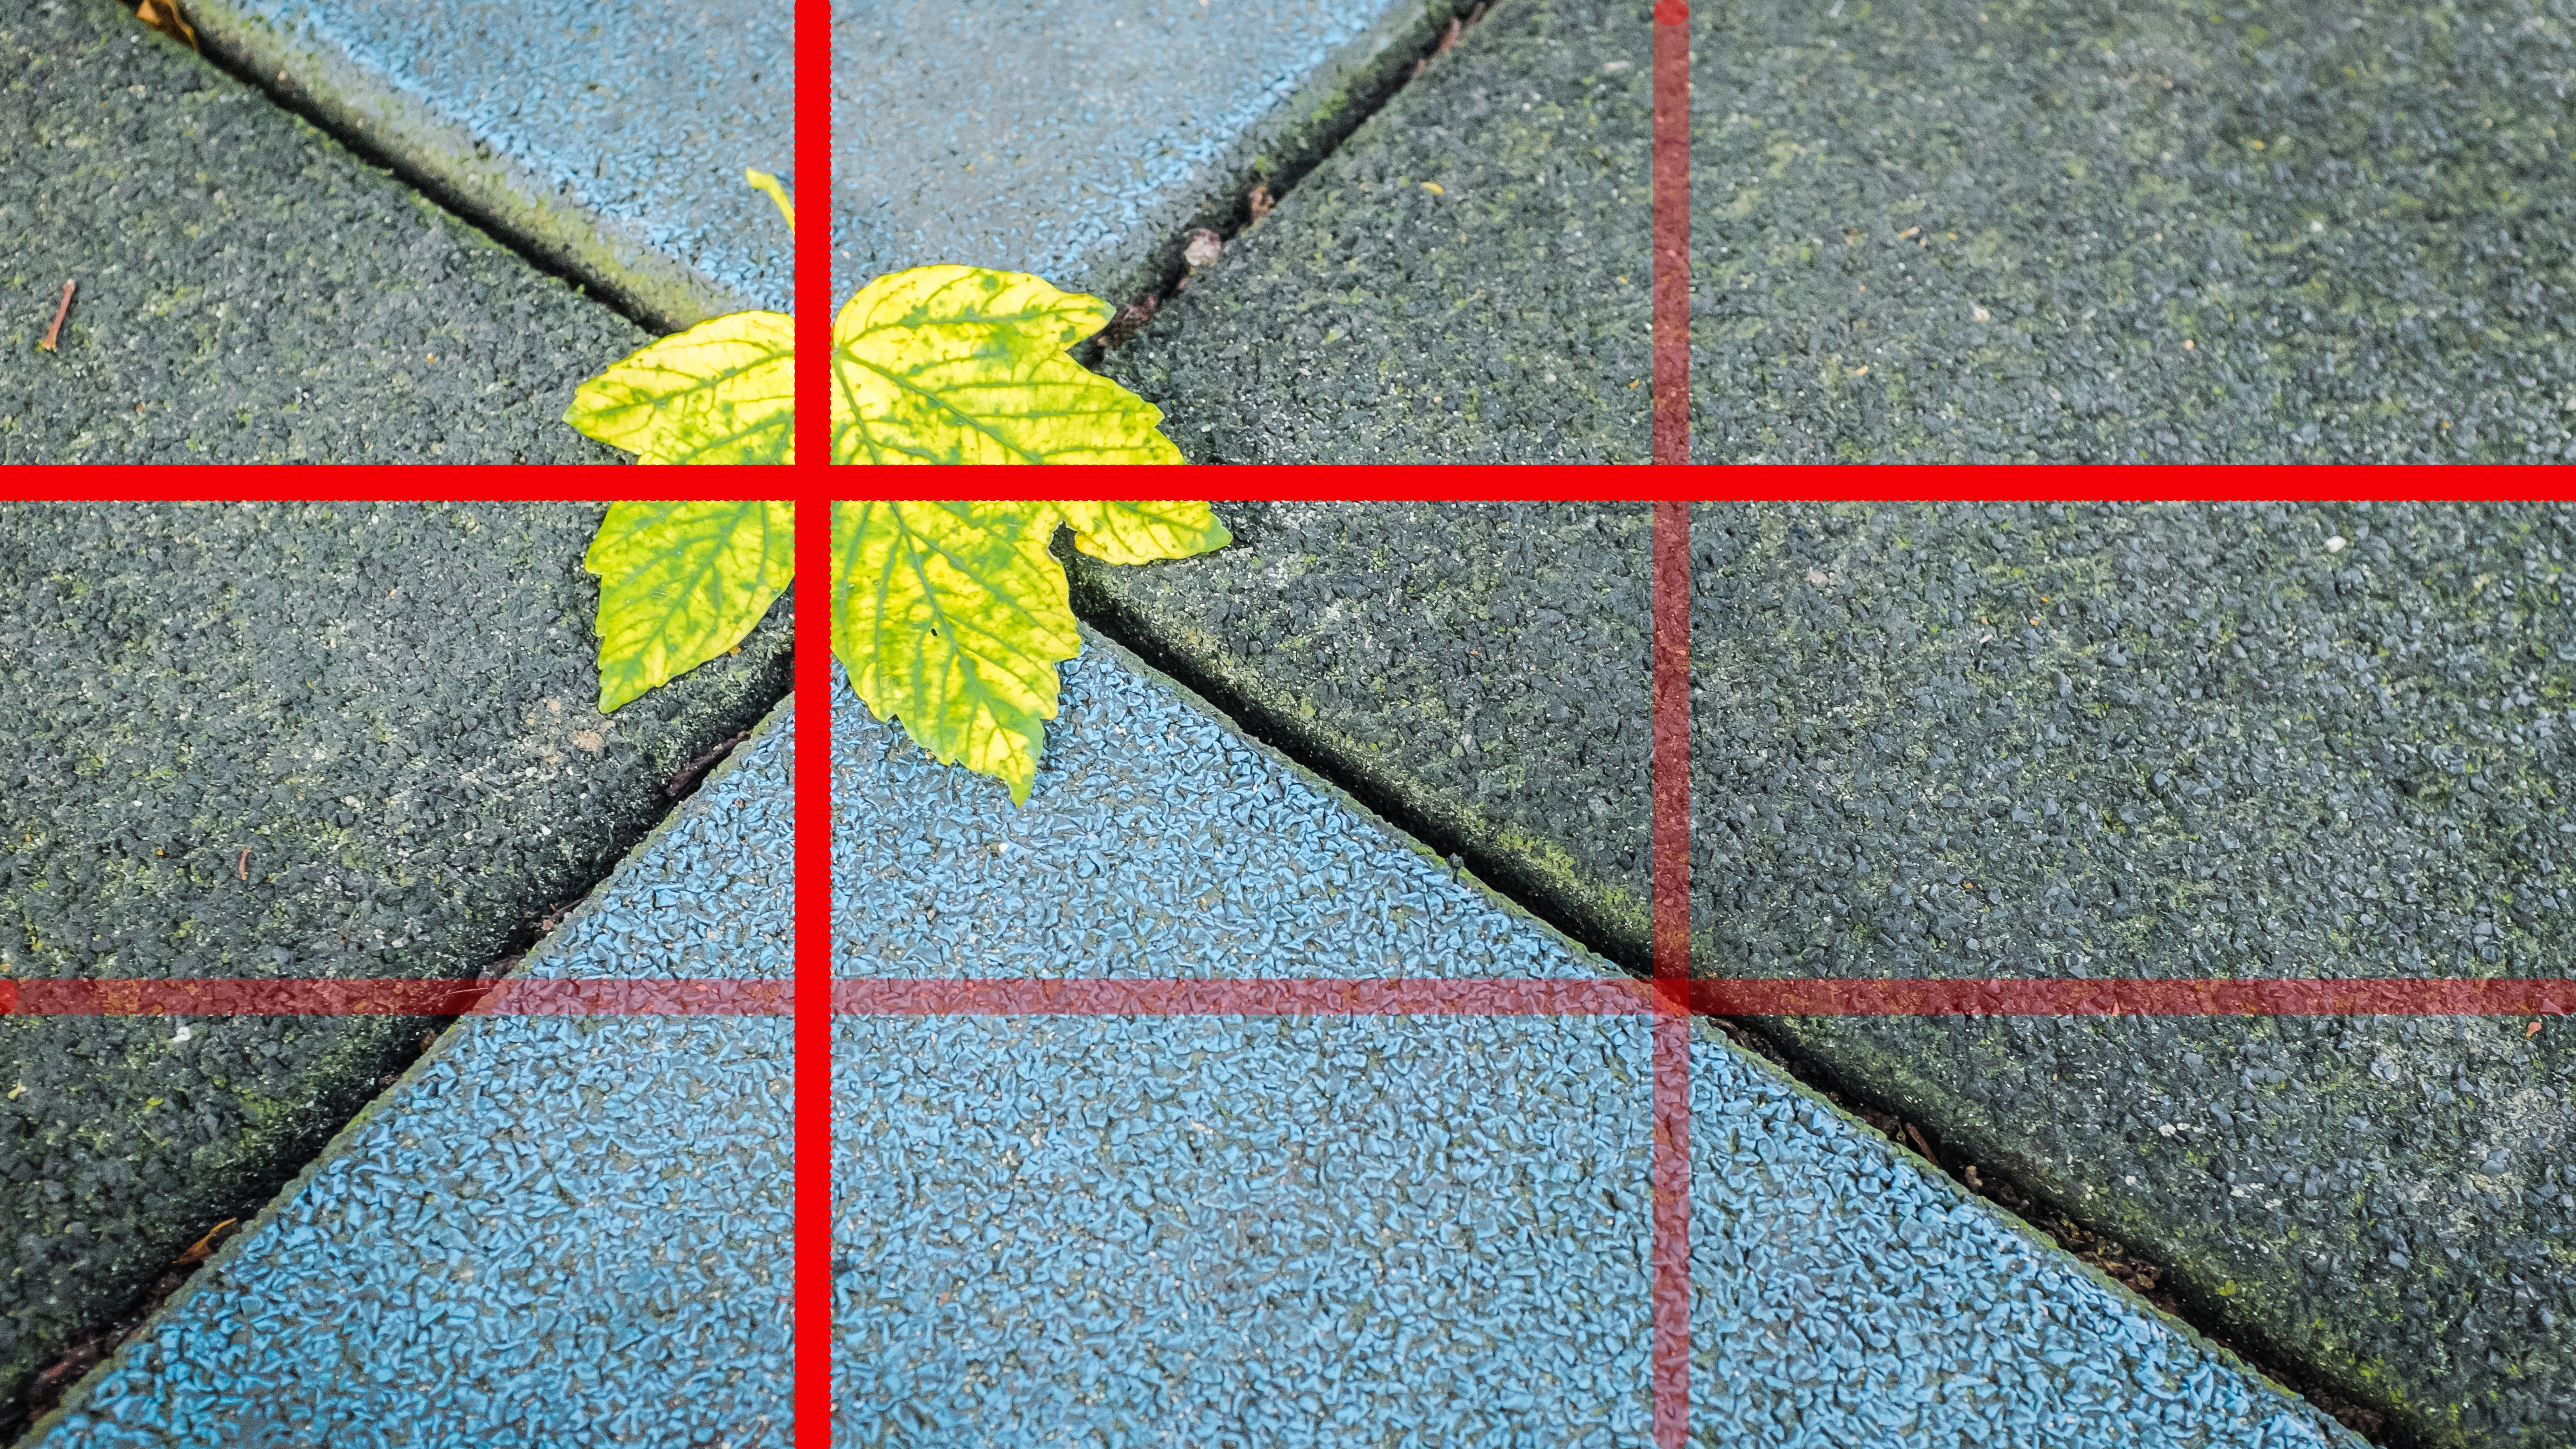 A solitary leaf on colored paving slabs, photographed using the rule of thirds